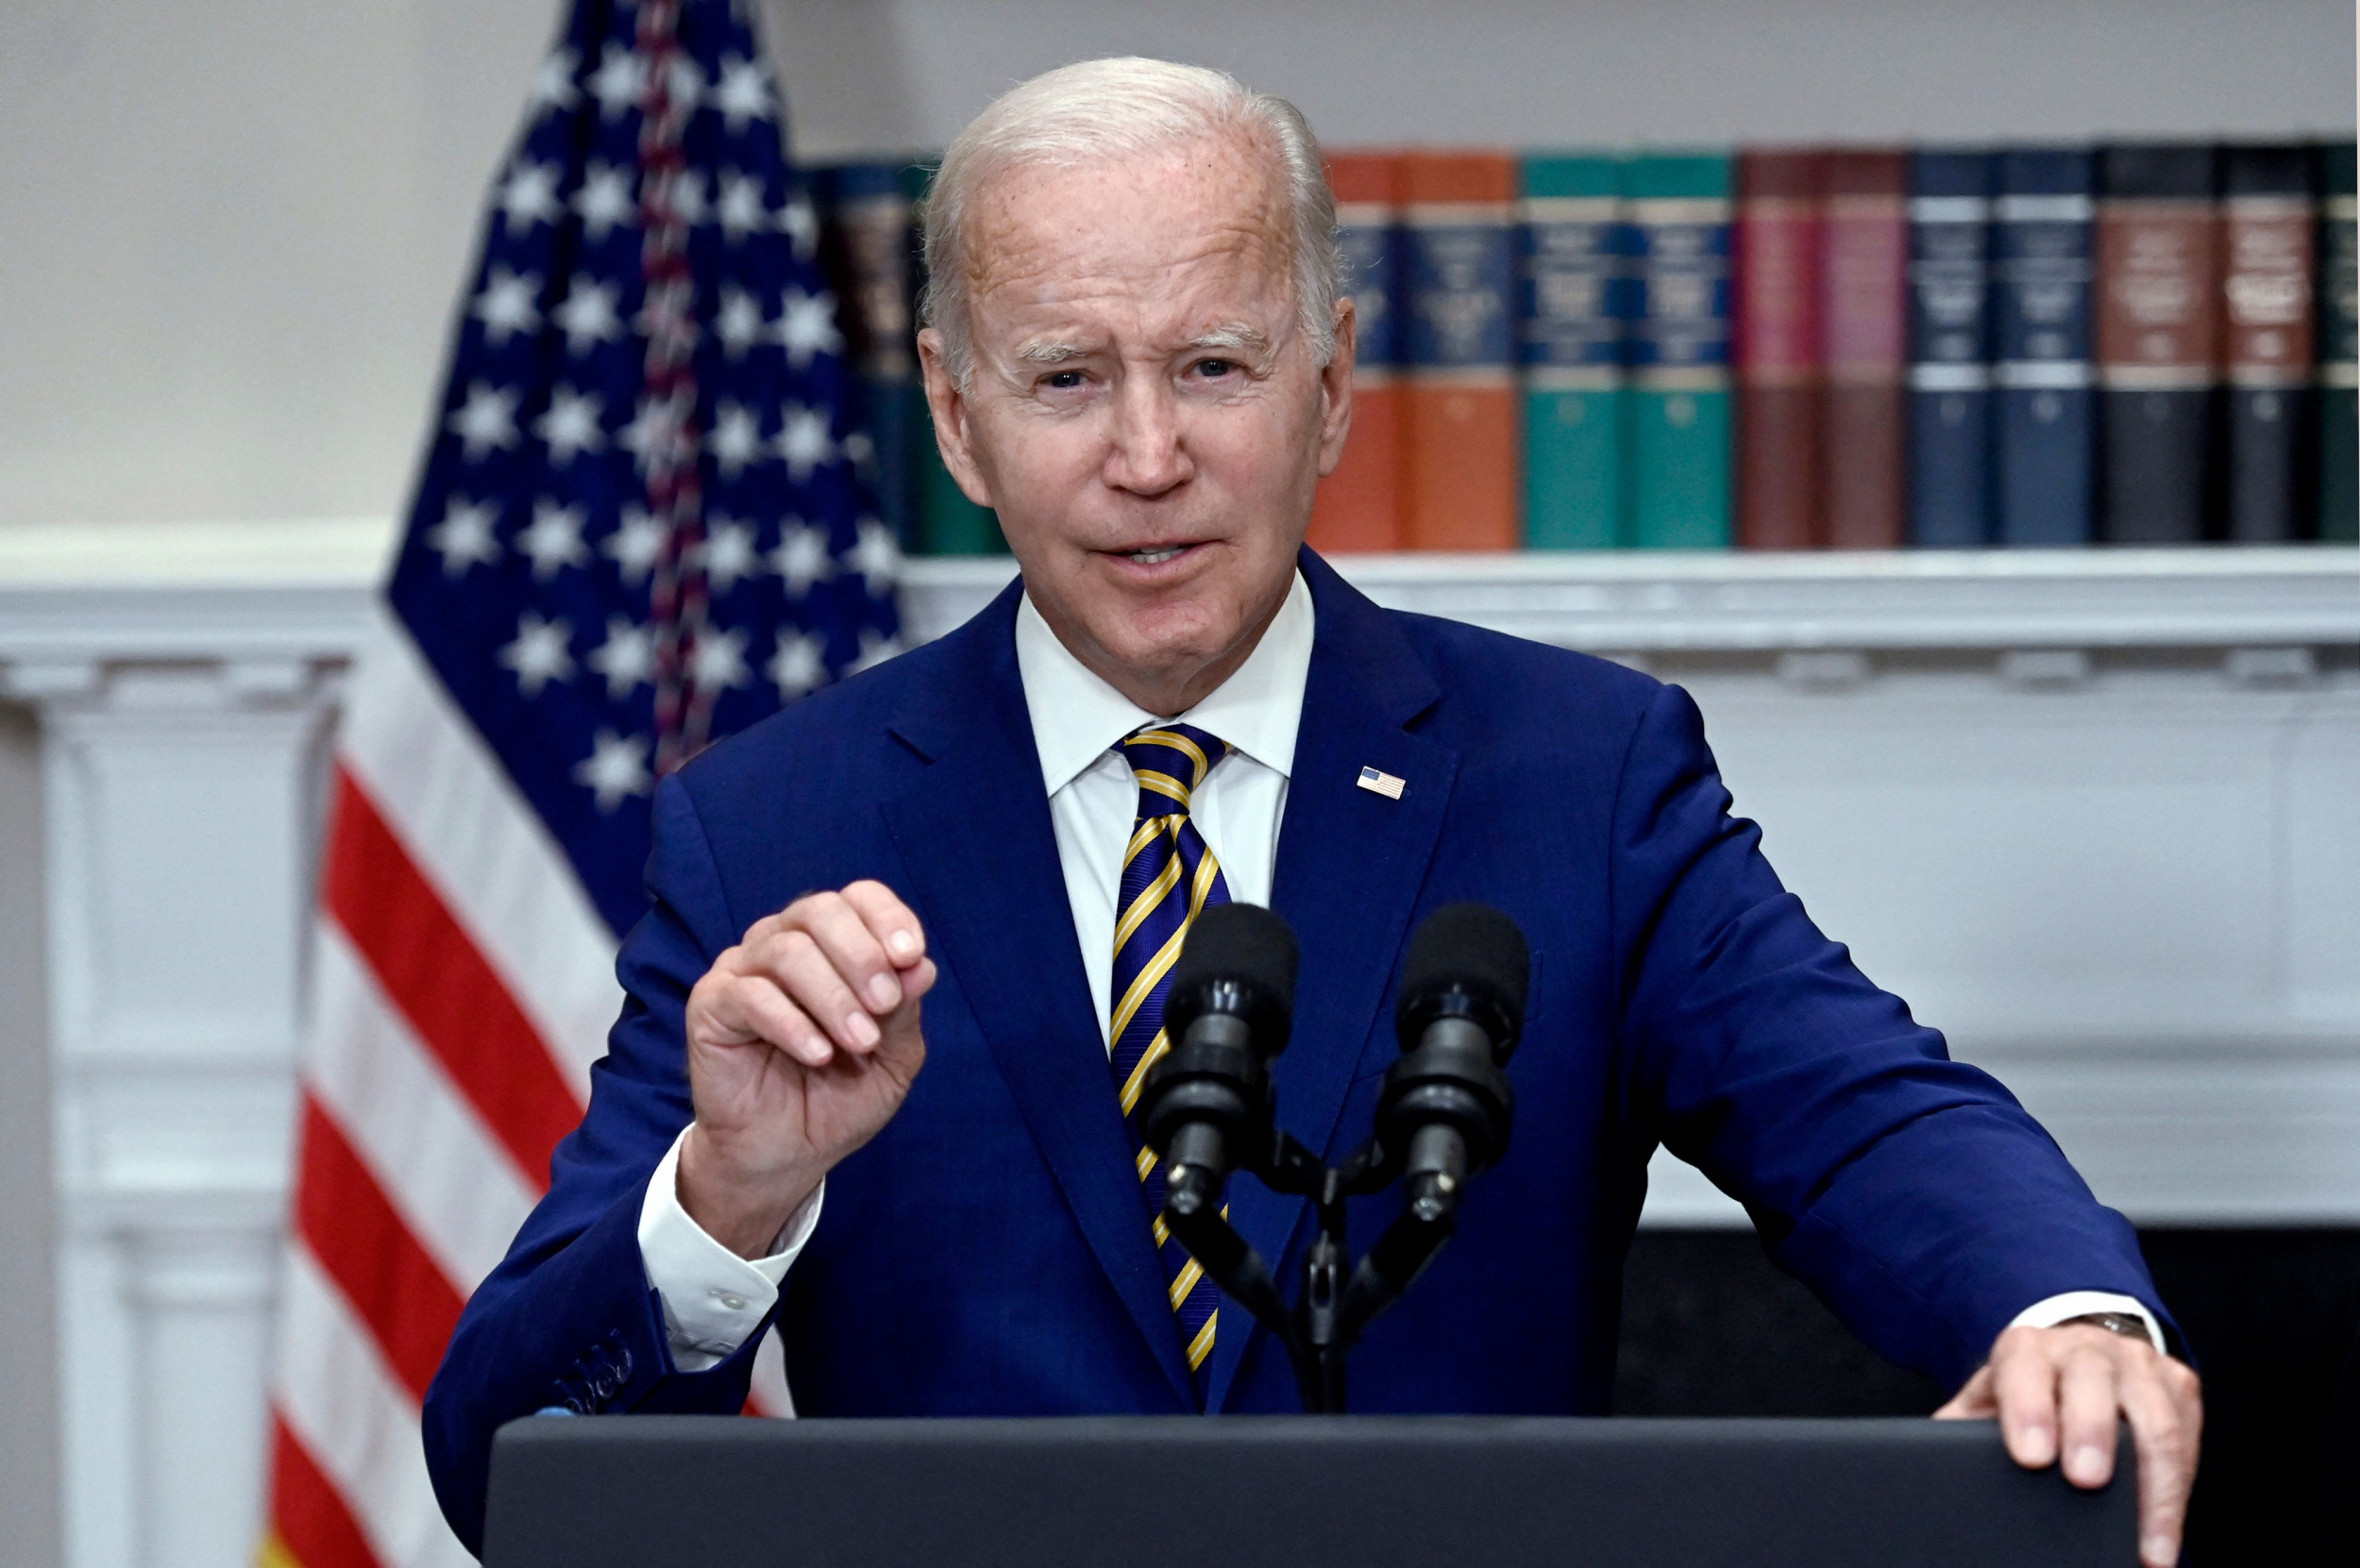 Biden's Student Loan Stunt Is a Desperate Attempt To Buy Votes | Opinion